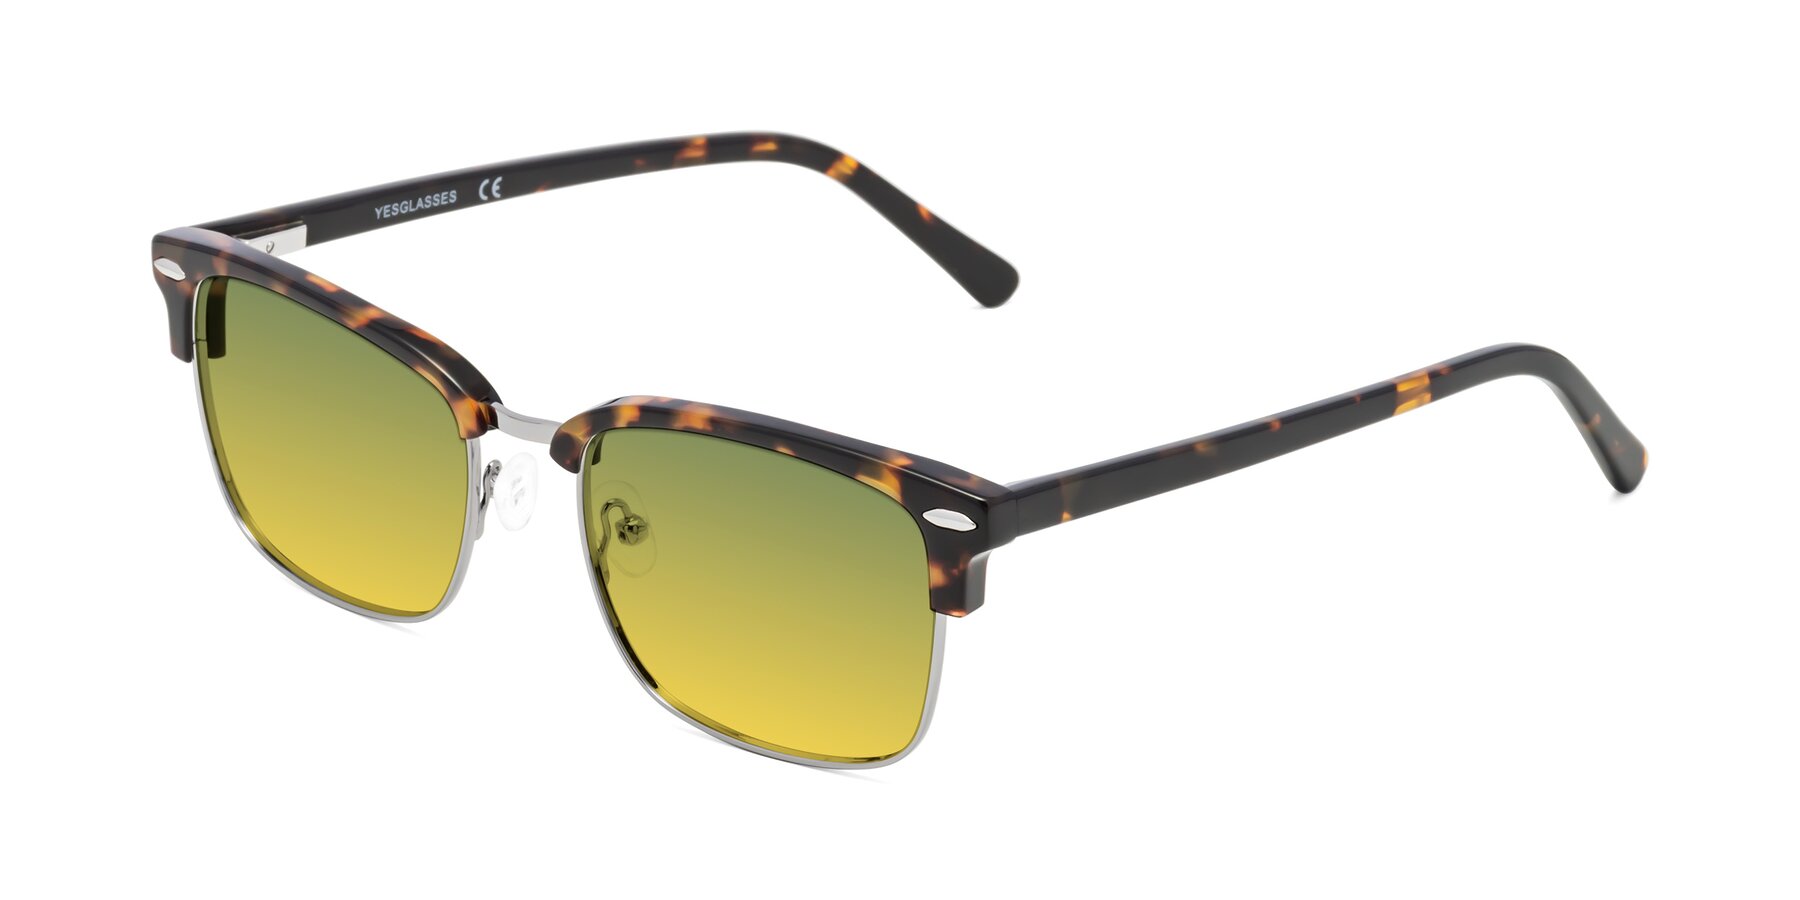 Angle of 17464 in Tortoise/ Gunmetal with Green / Yellow Gradient Lenses